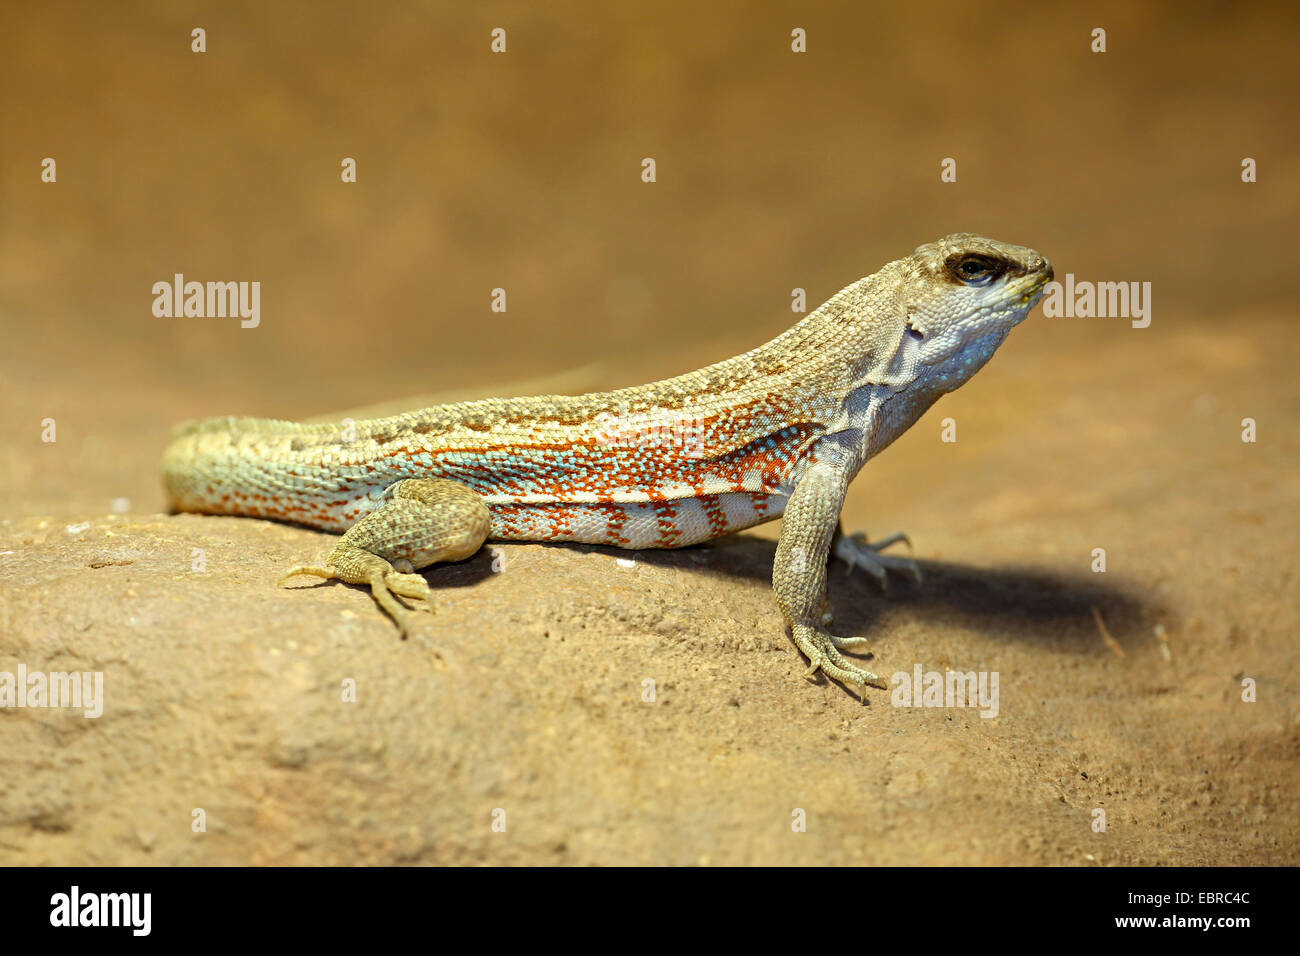 Red-sided curlytail lizard, Haitian curly-tail (Leiocephalus schreibersii),  on a stone Stock Photo - Alamy